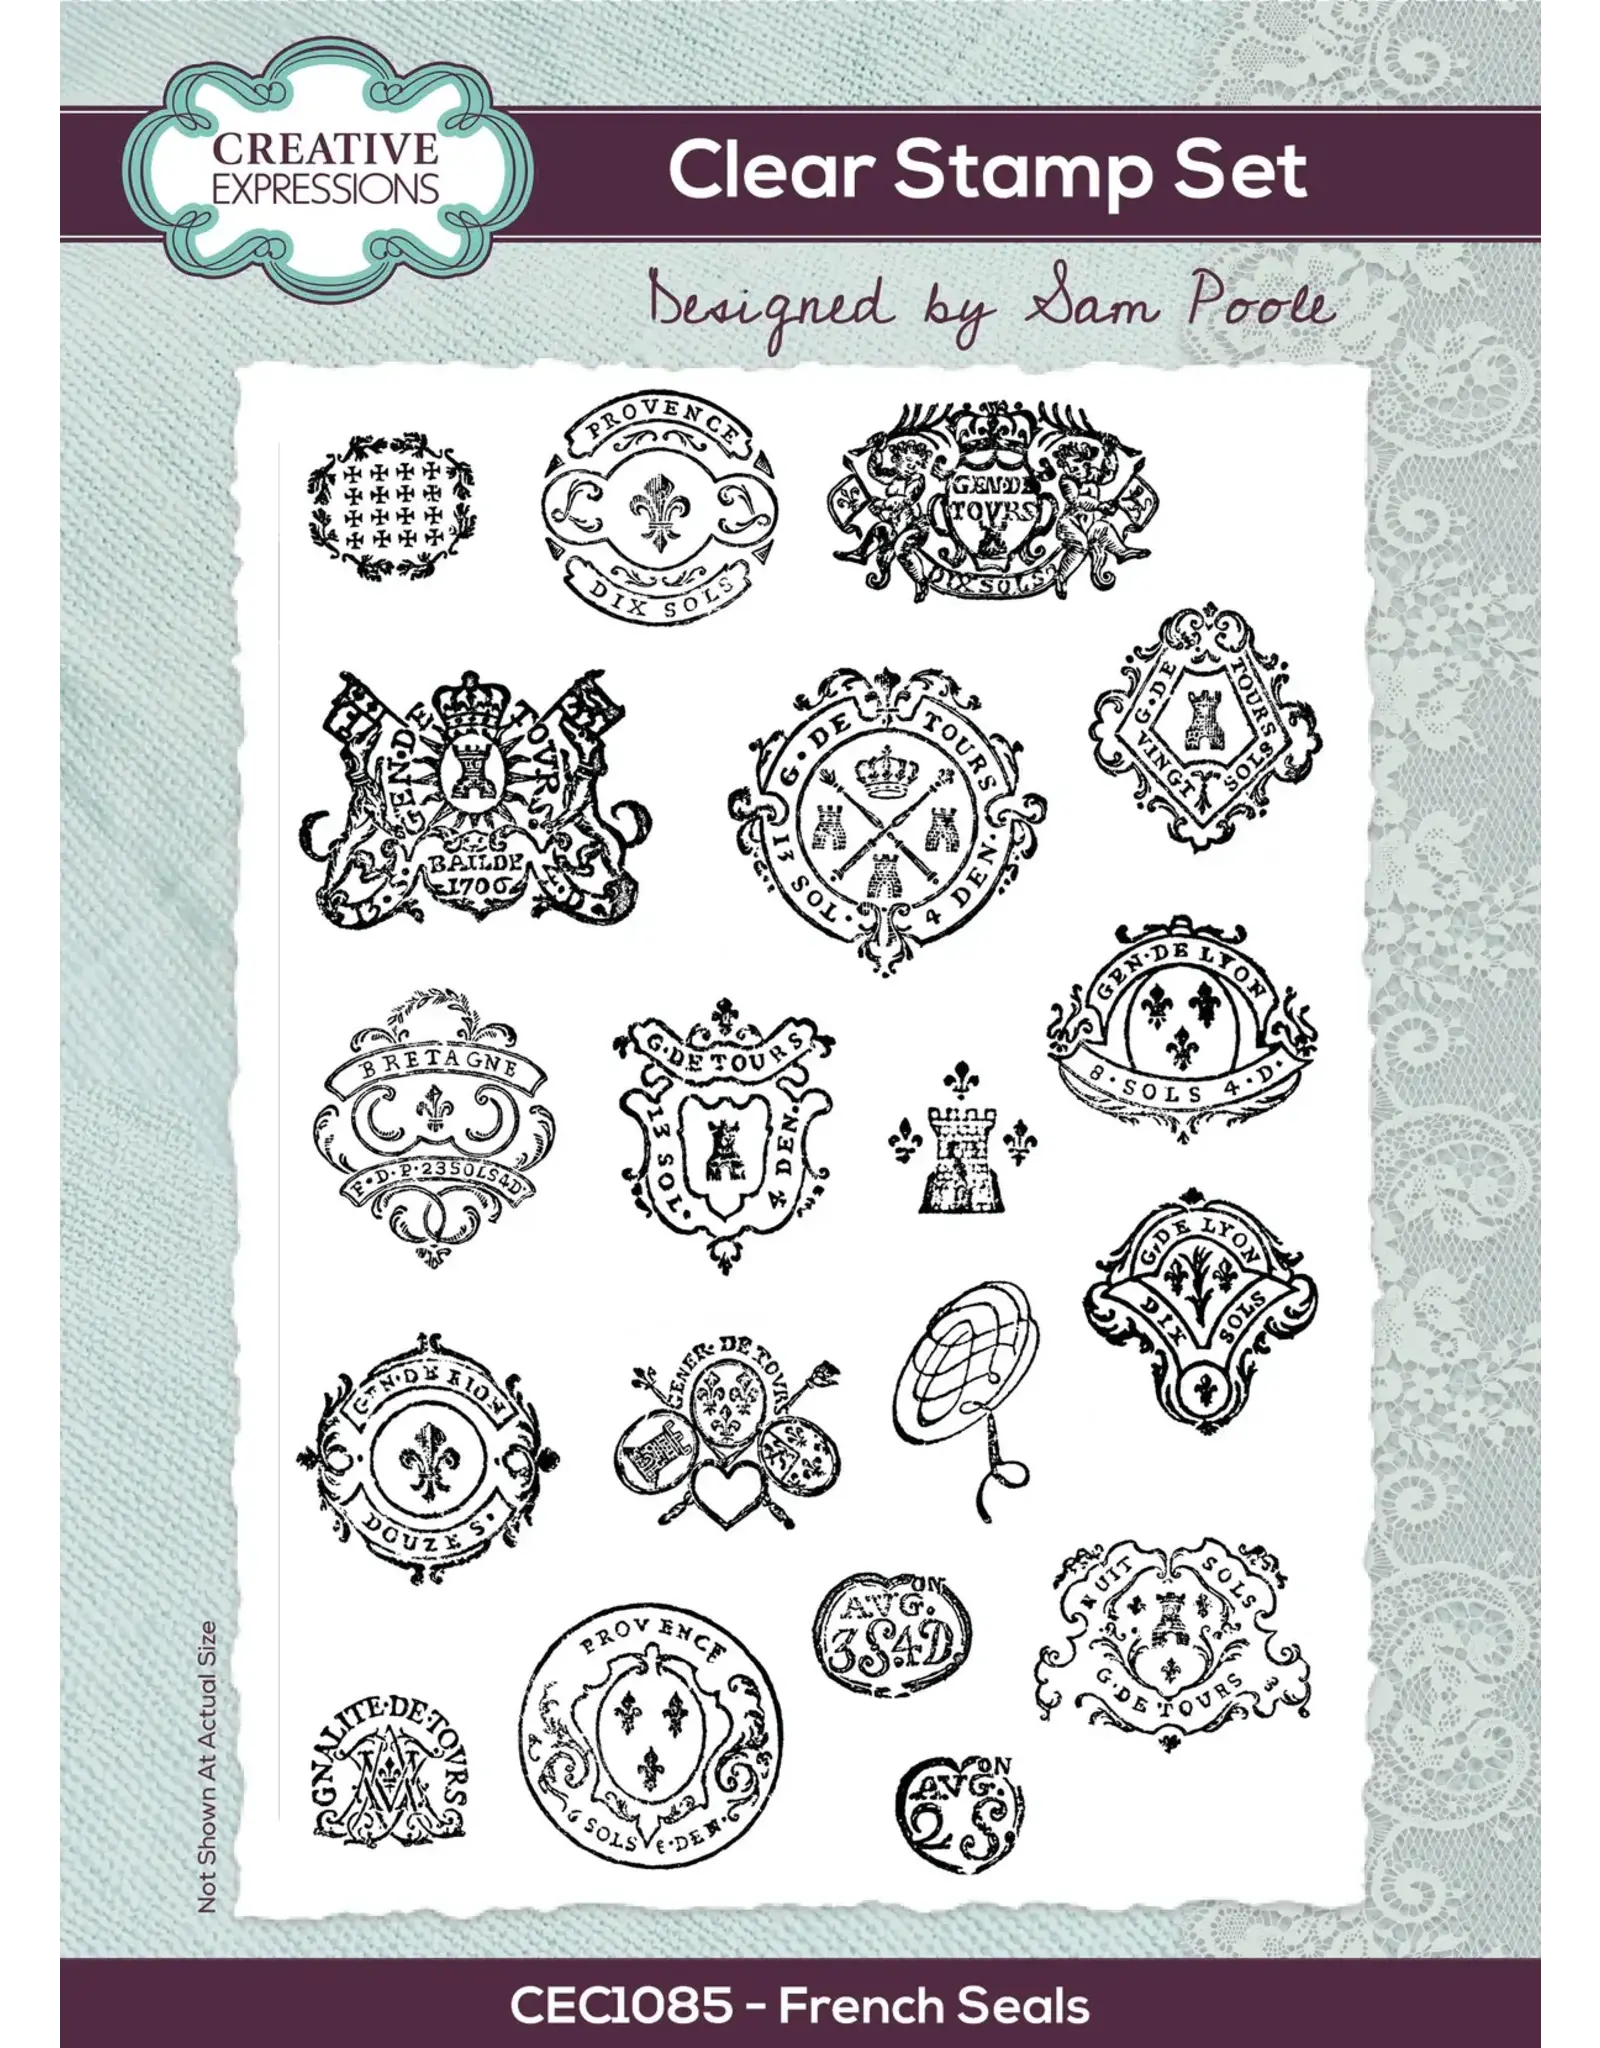 CREATIVE EXPRESSIONS CREATIVE EXPRESSIONS SAM POOLE FRENCH SEALS 6x8 CLEAR STAMP SET